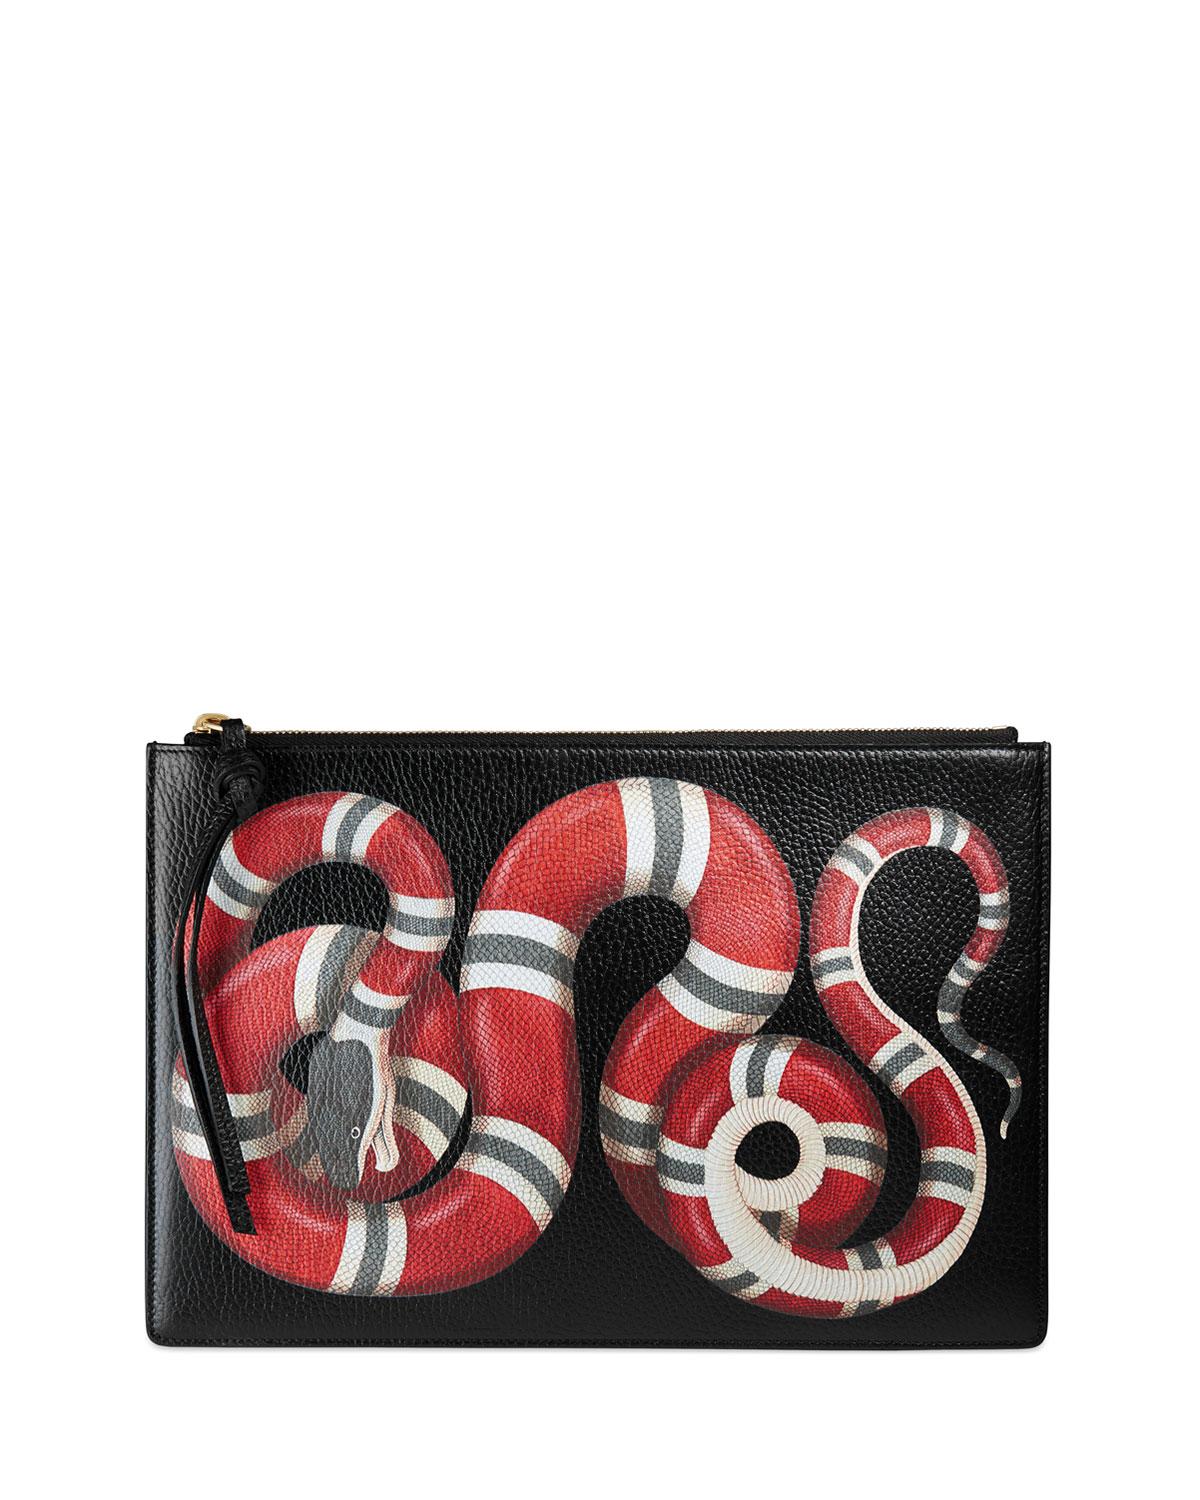 Lyst - Gucci Snake-print Leather Clutch Bag in Black